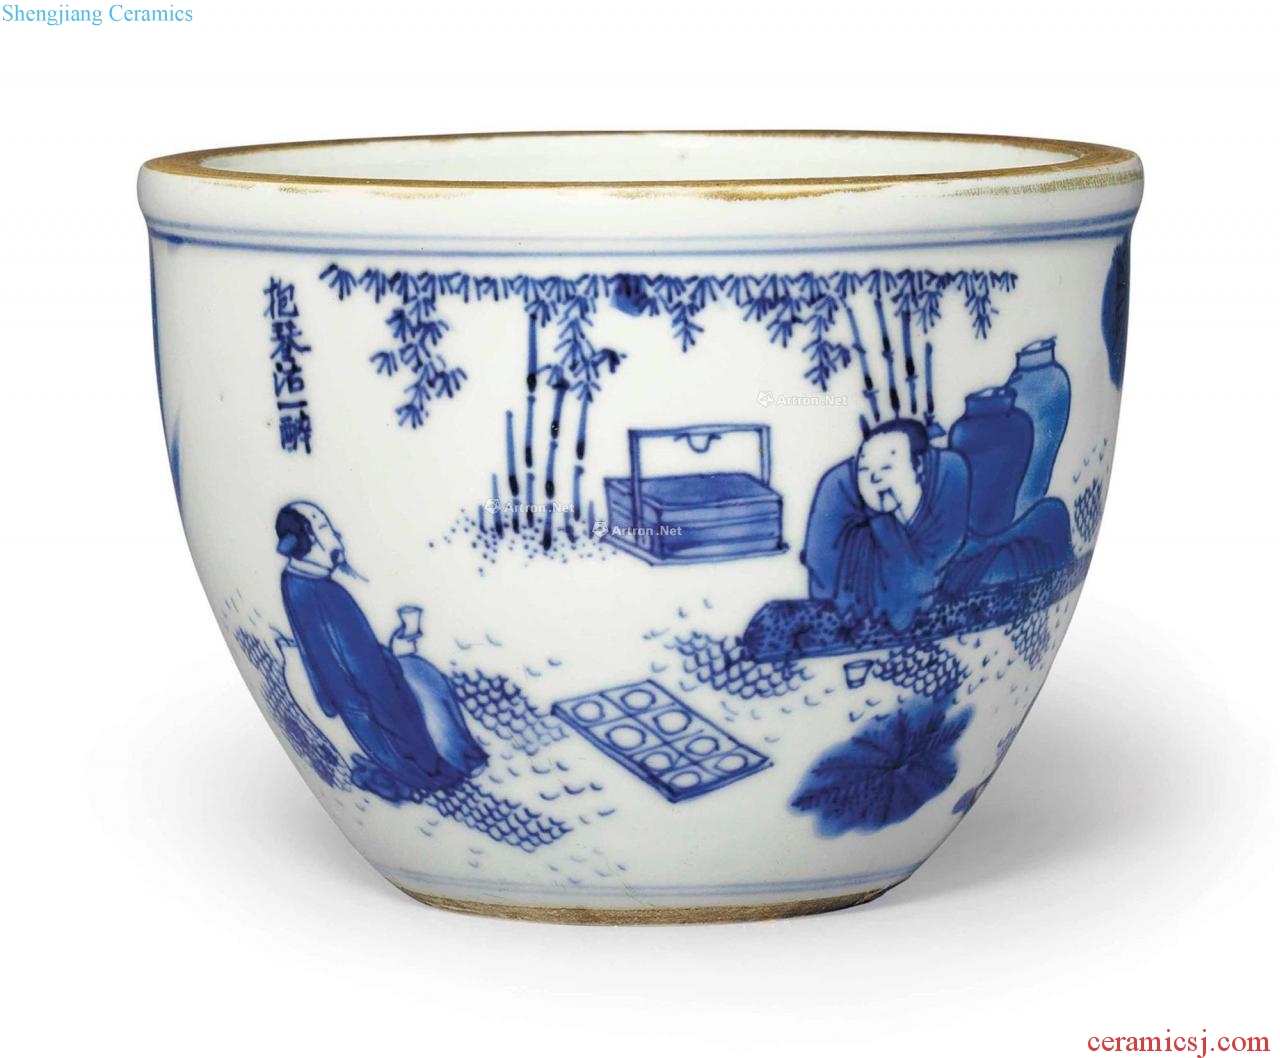 About 1640-1650 - A SMALL BLUE AND WHITE JARDINIERE